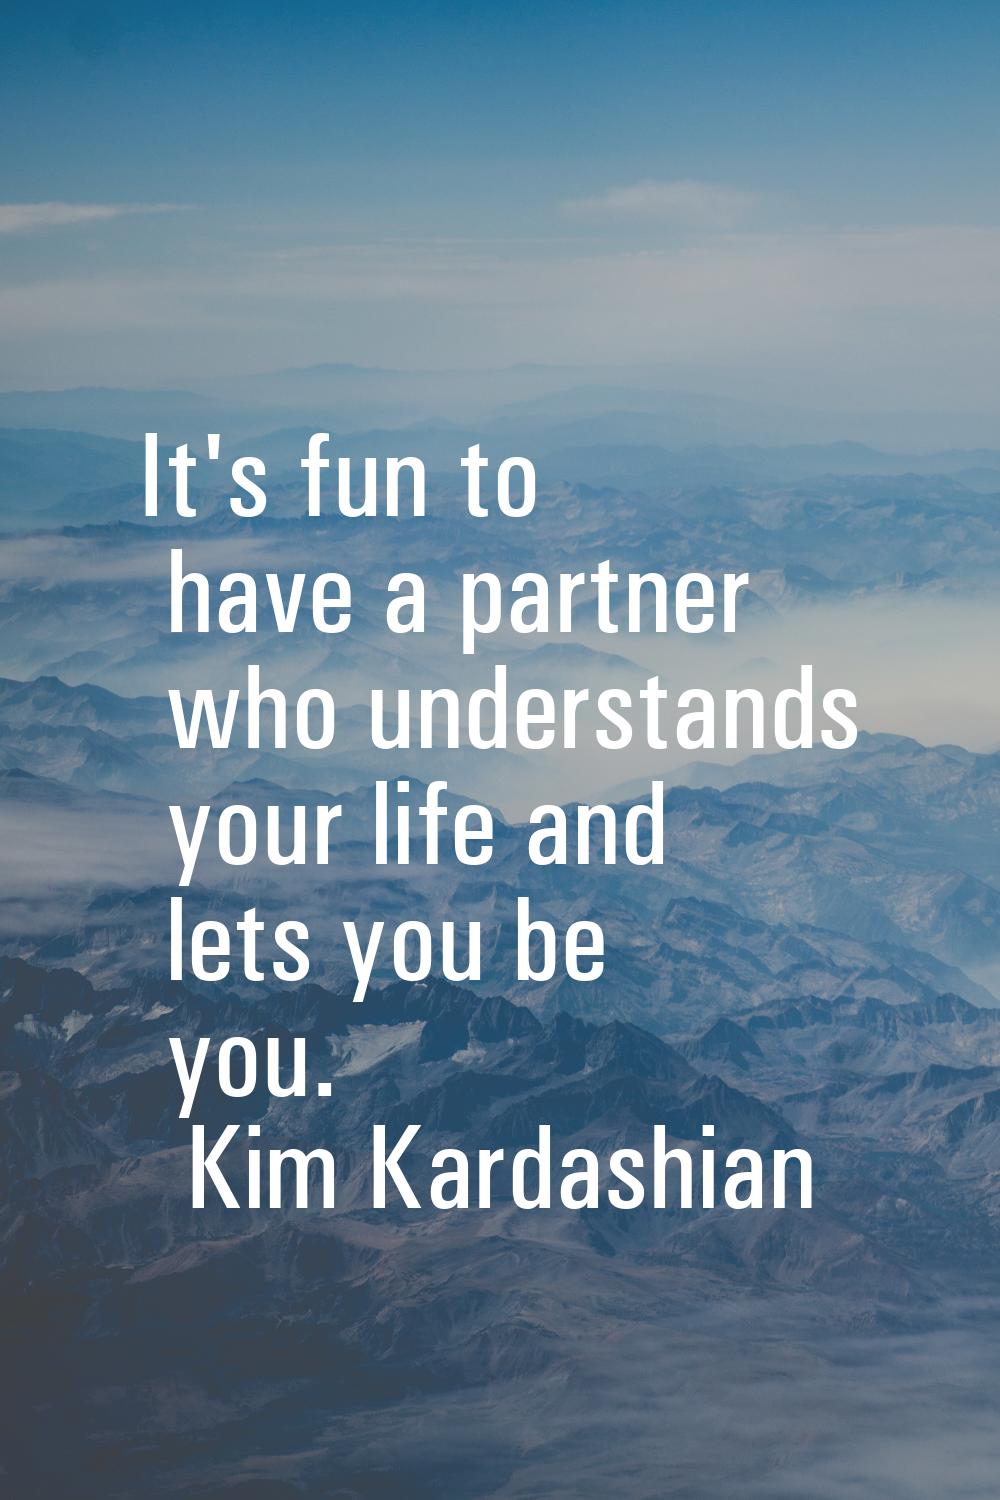 It's fun to have a partner who understands your life and lets you be you.